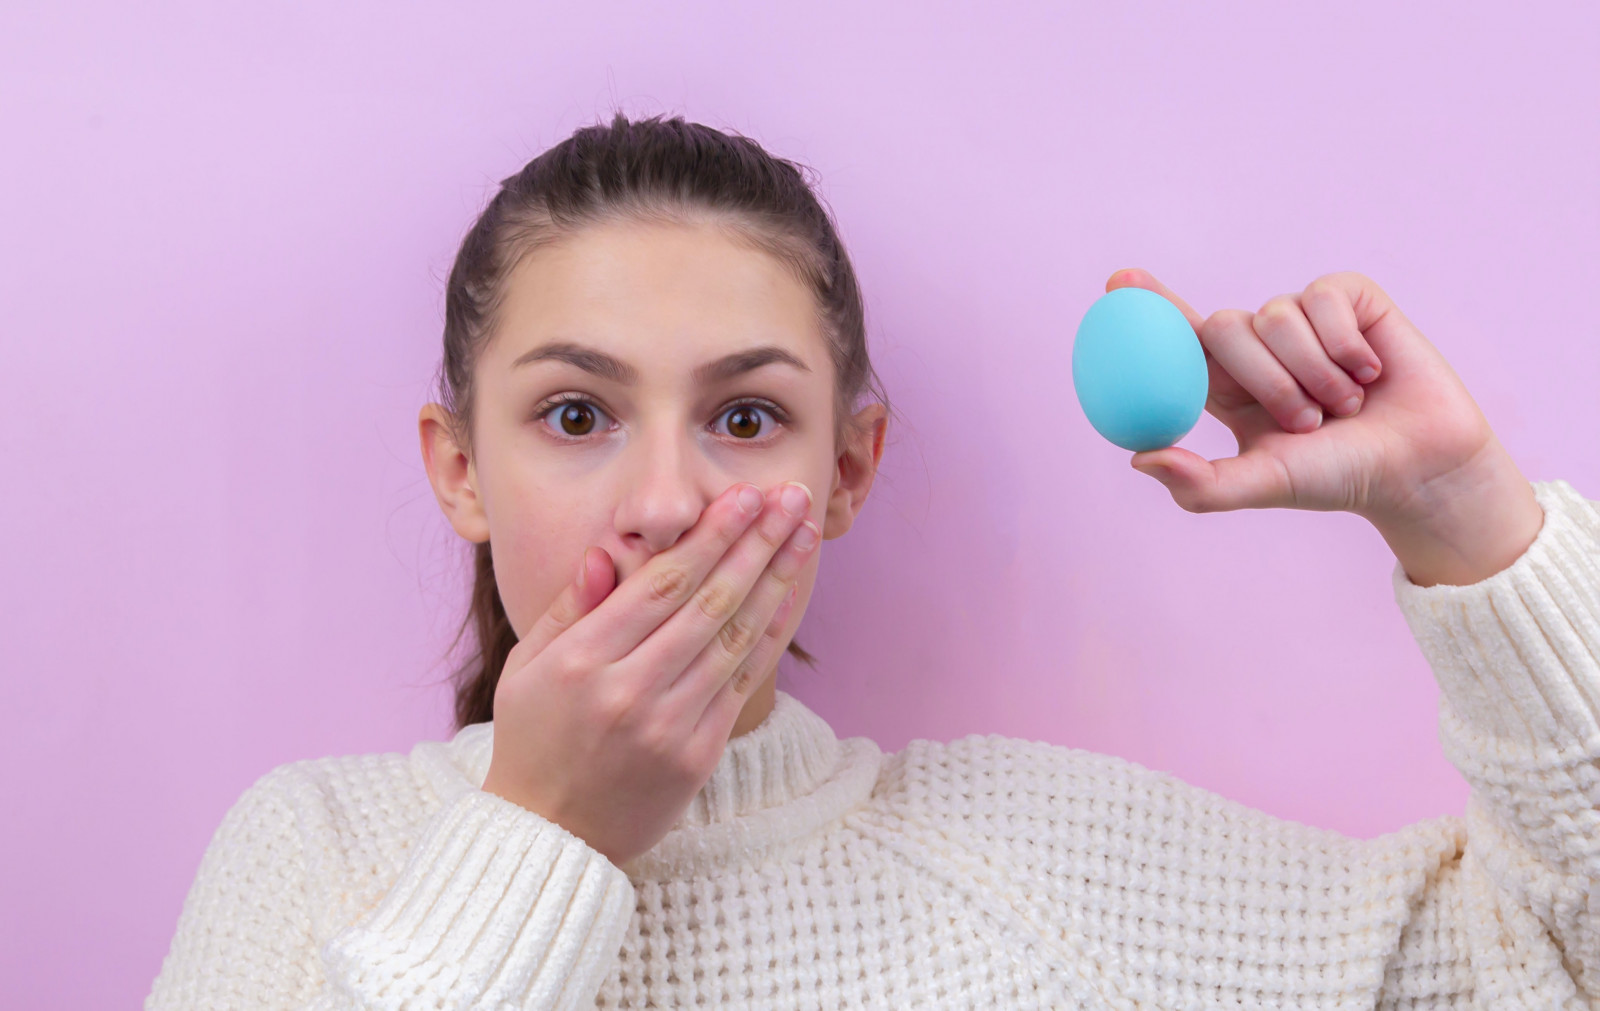 woman in white sweater holding blue egg